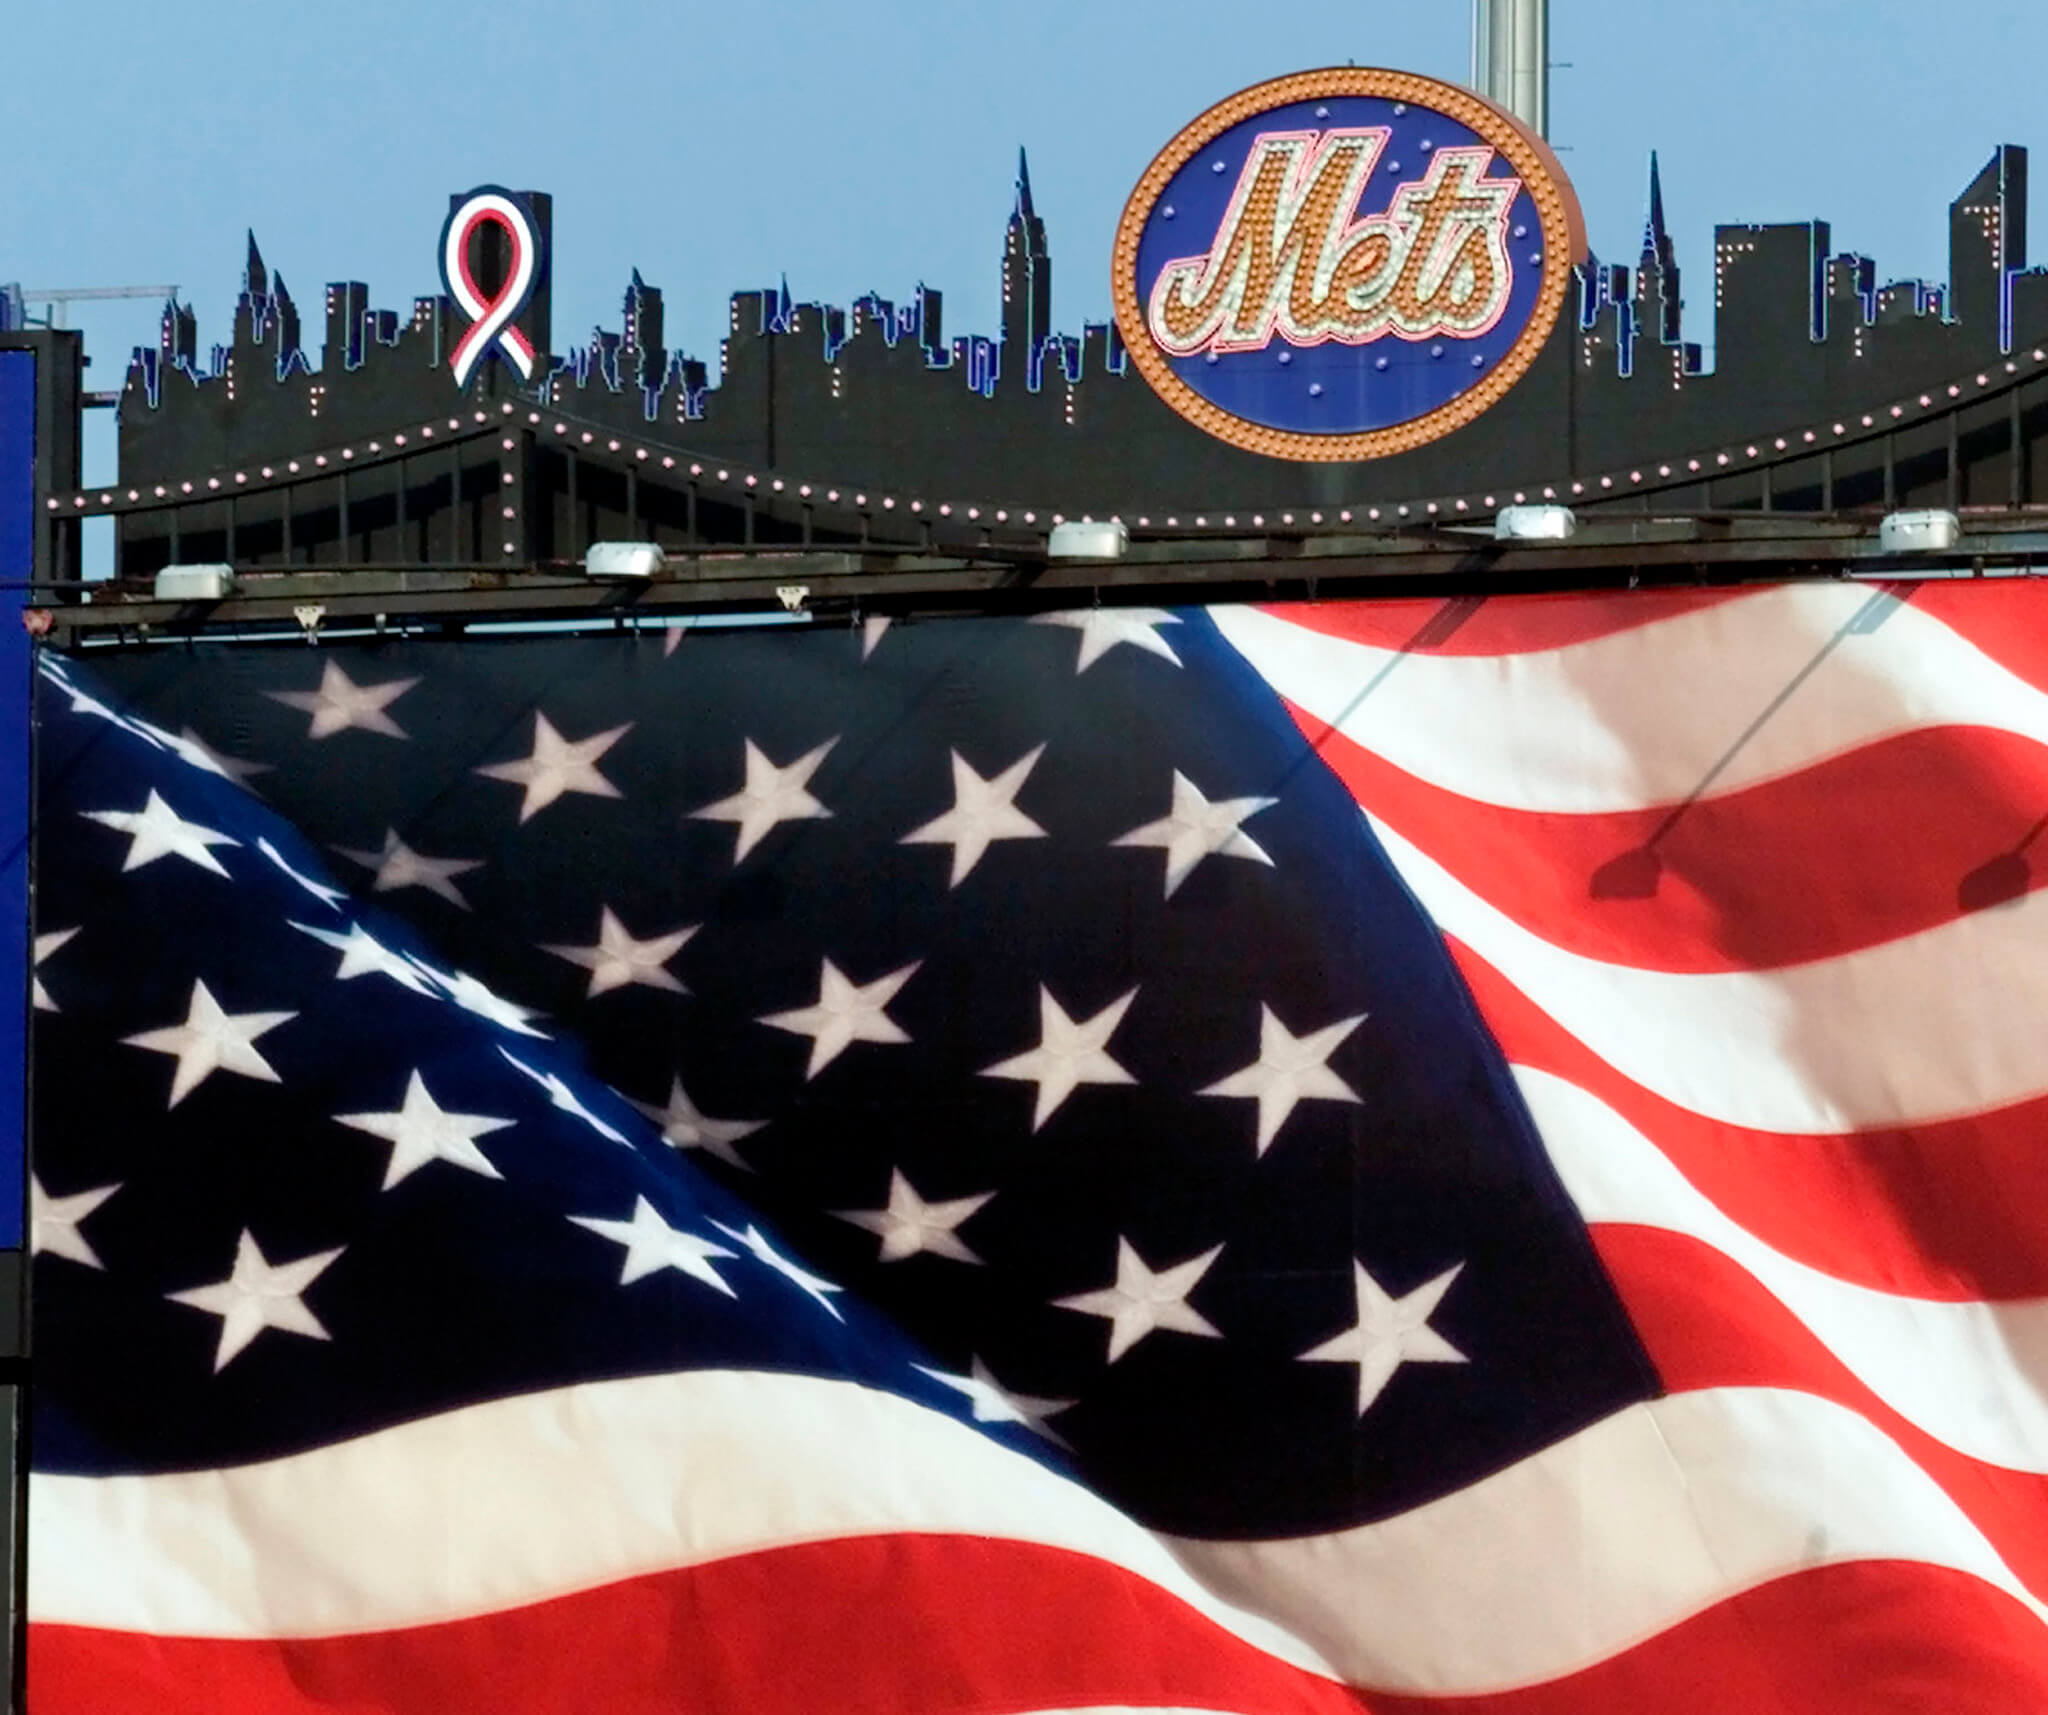 Mets, Yankees, New York fans commemorate 20th anniversary of 9/11